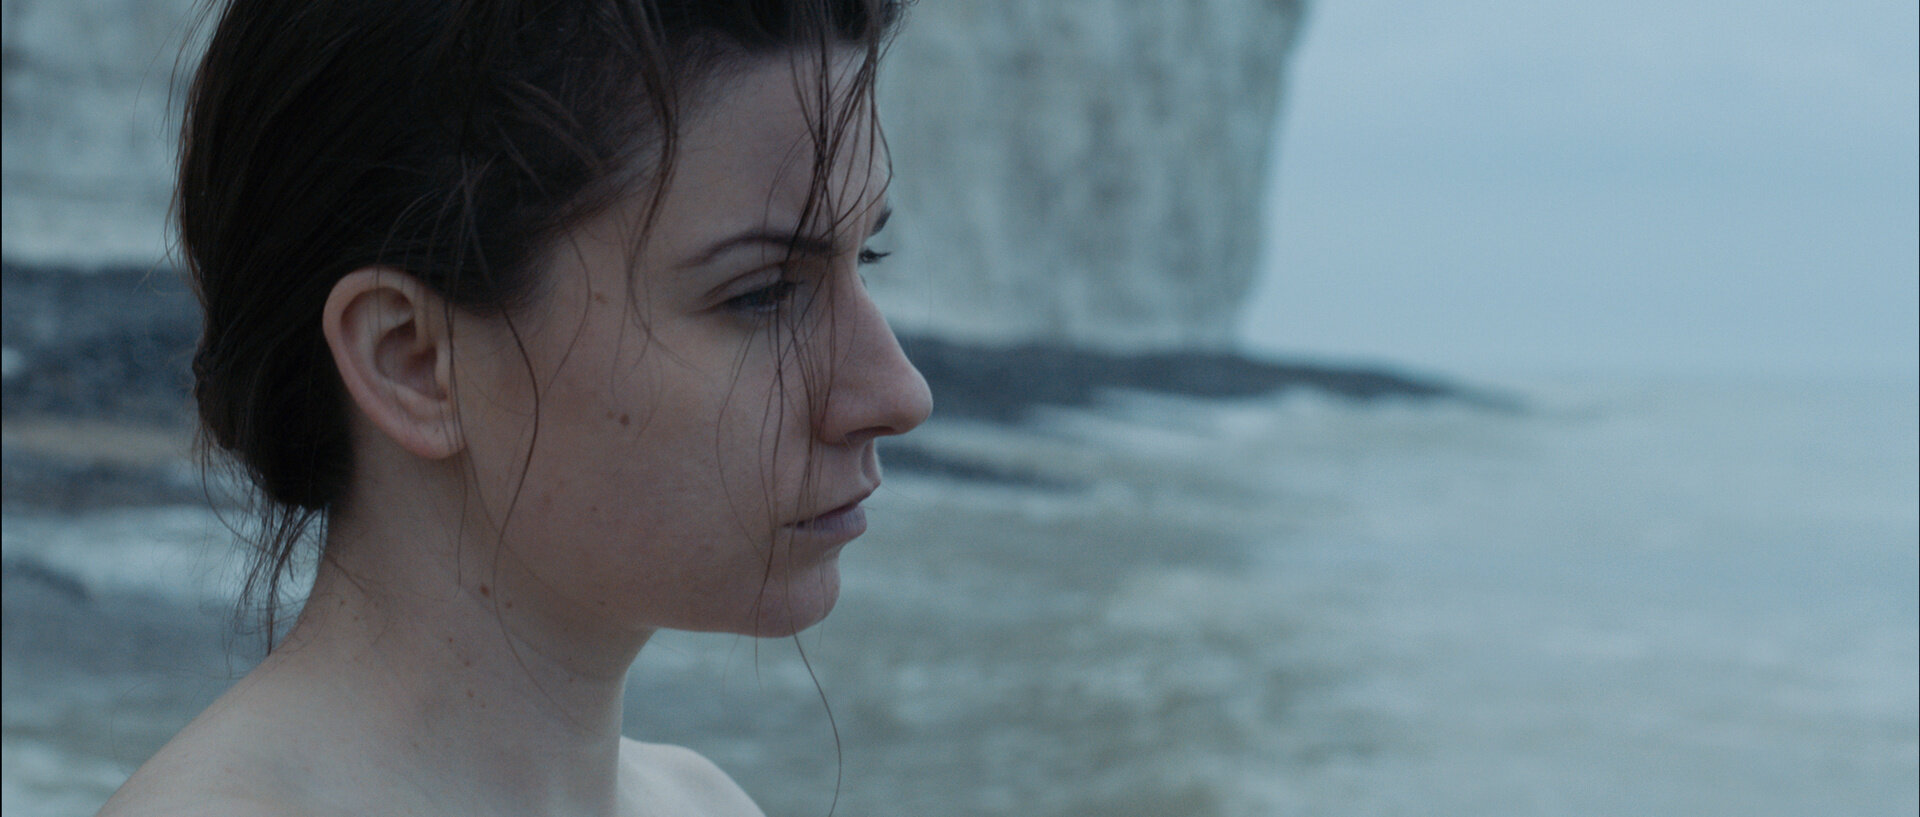 Siren - a short film by Louise Marie Cooke